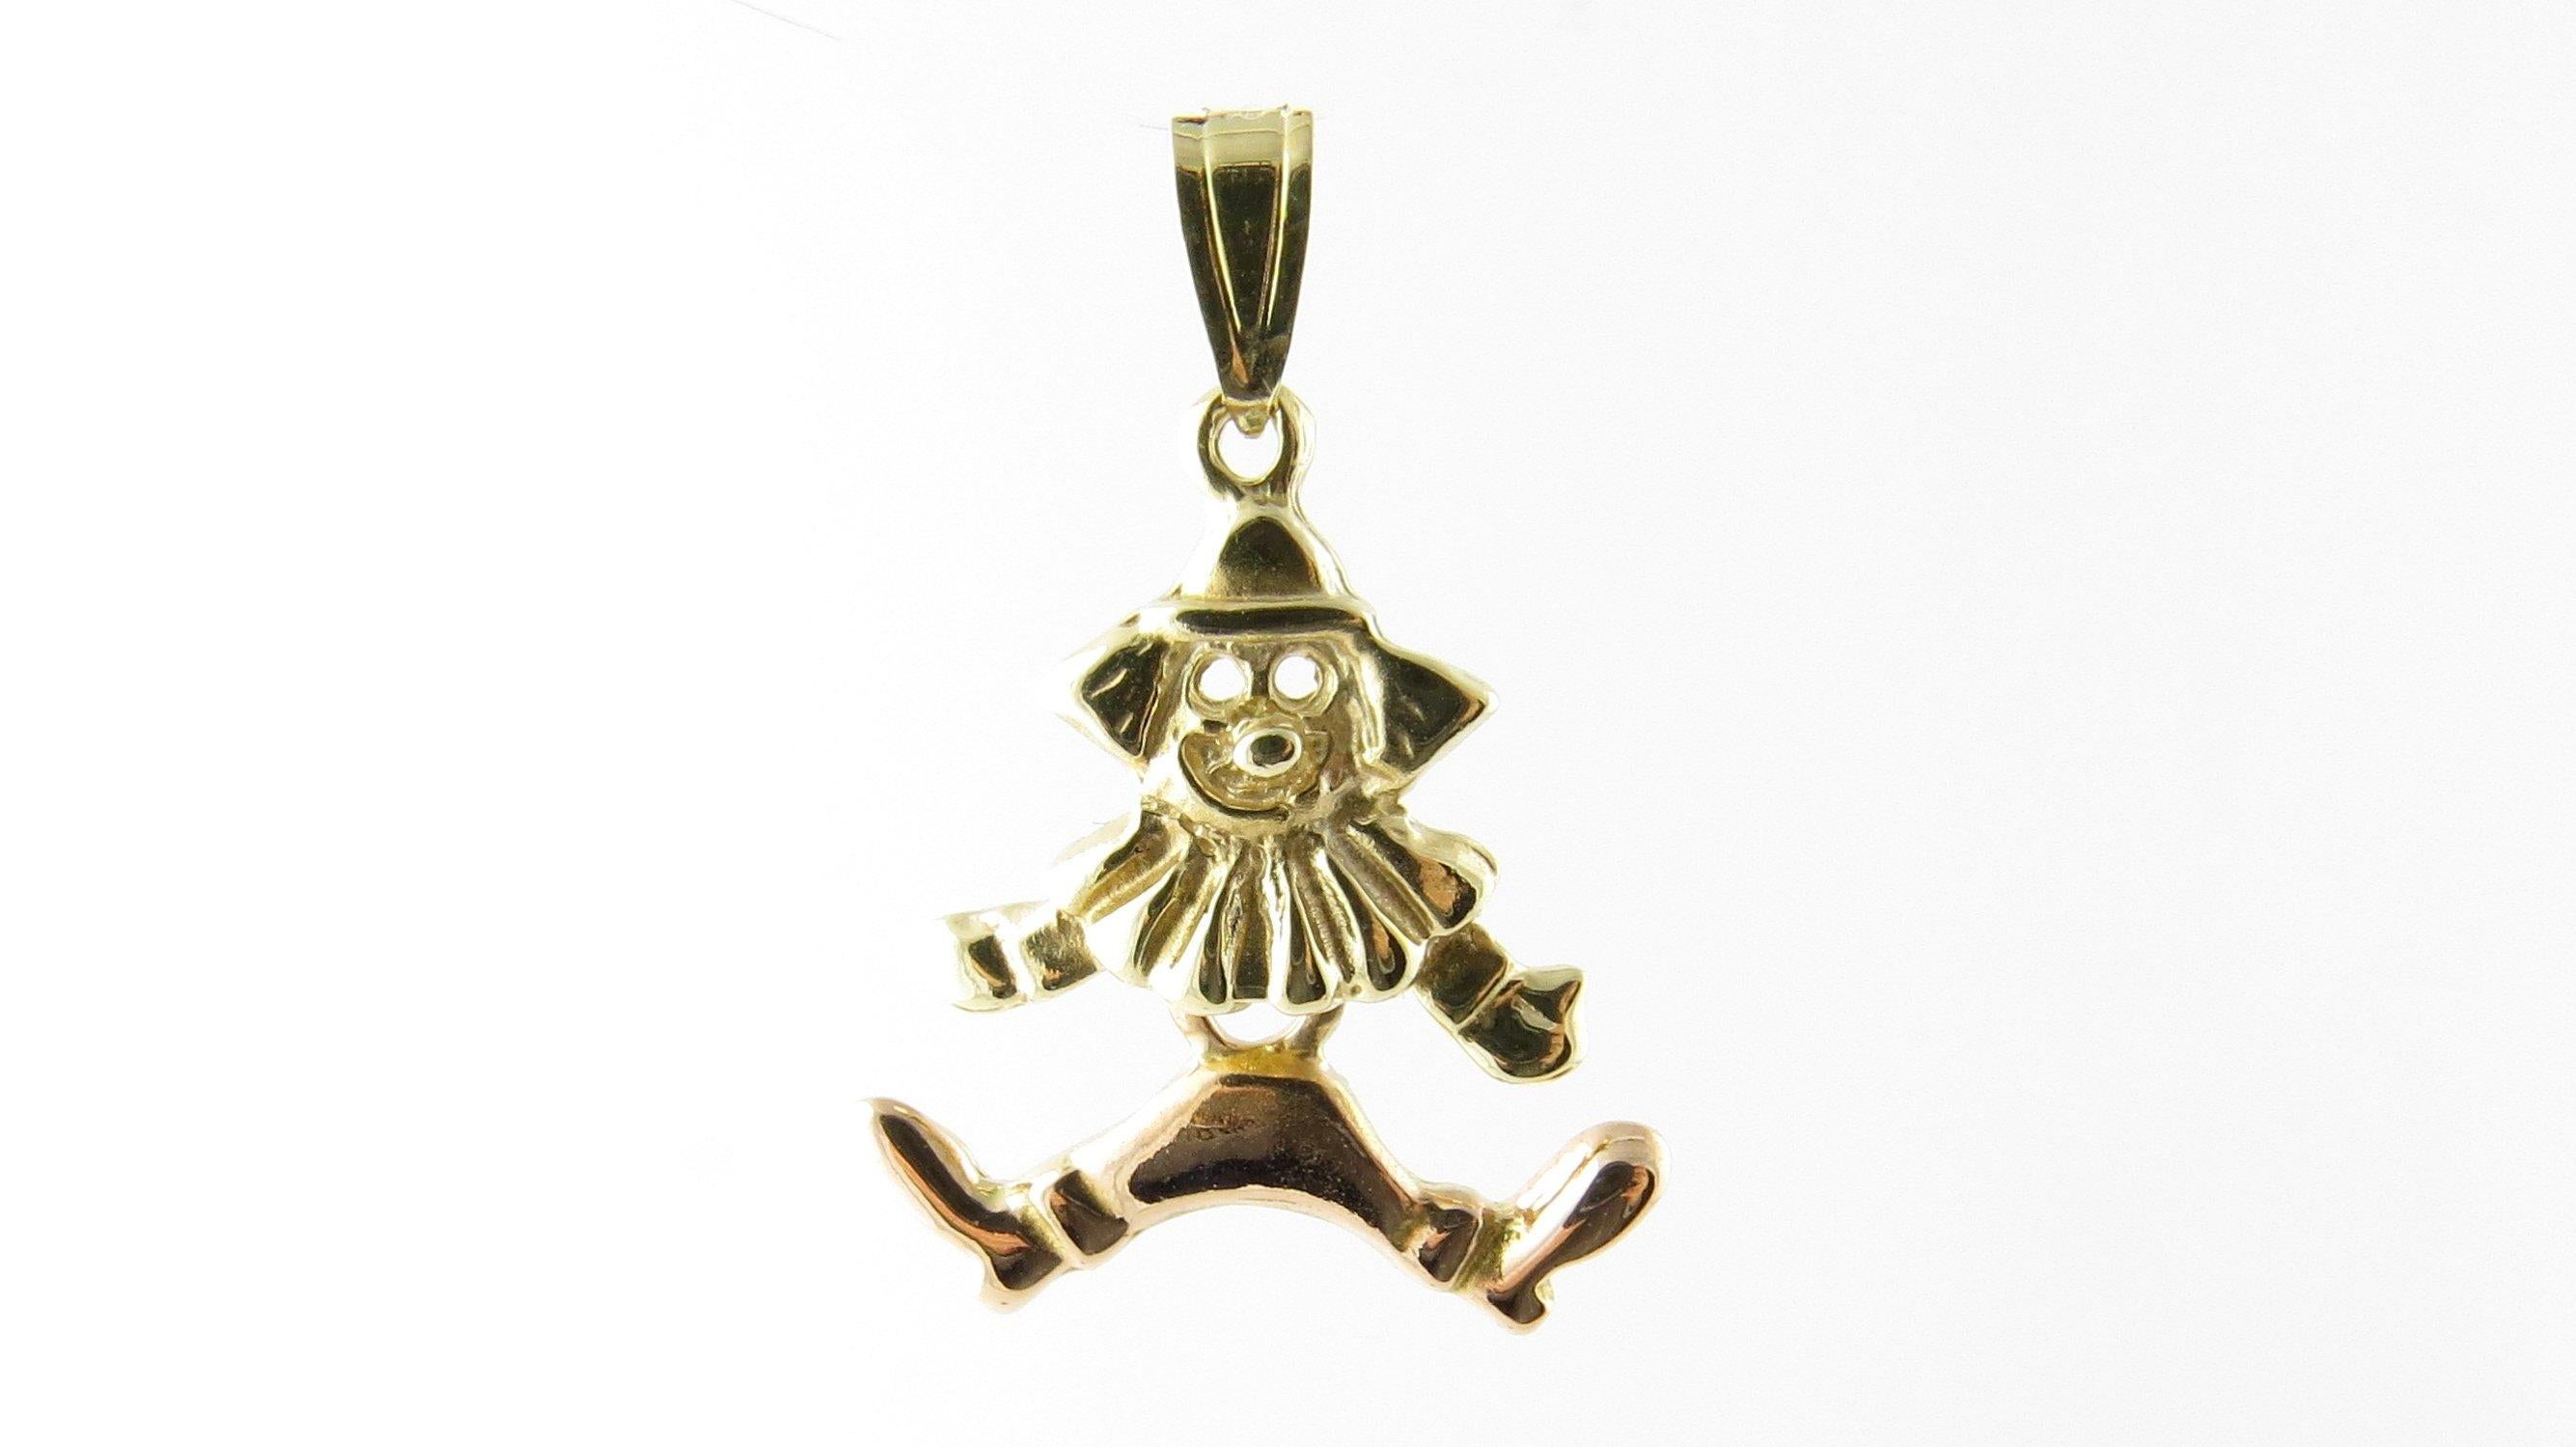 Vintage 14 Karat Yellow Gold Articulated Clown Charm- These whimsical charm features a delightful clown with dangling legs meticulously detailed in 14K yellow gold. Size: 22 mm x 20 mm (actual charm) Weight: 1.8 dwt. / 2.8 gr. Stamped: 14K Very good